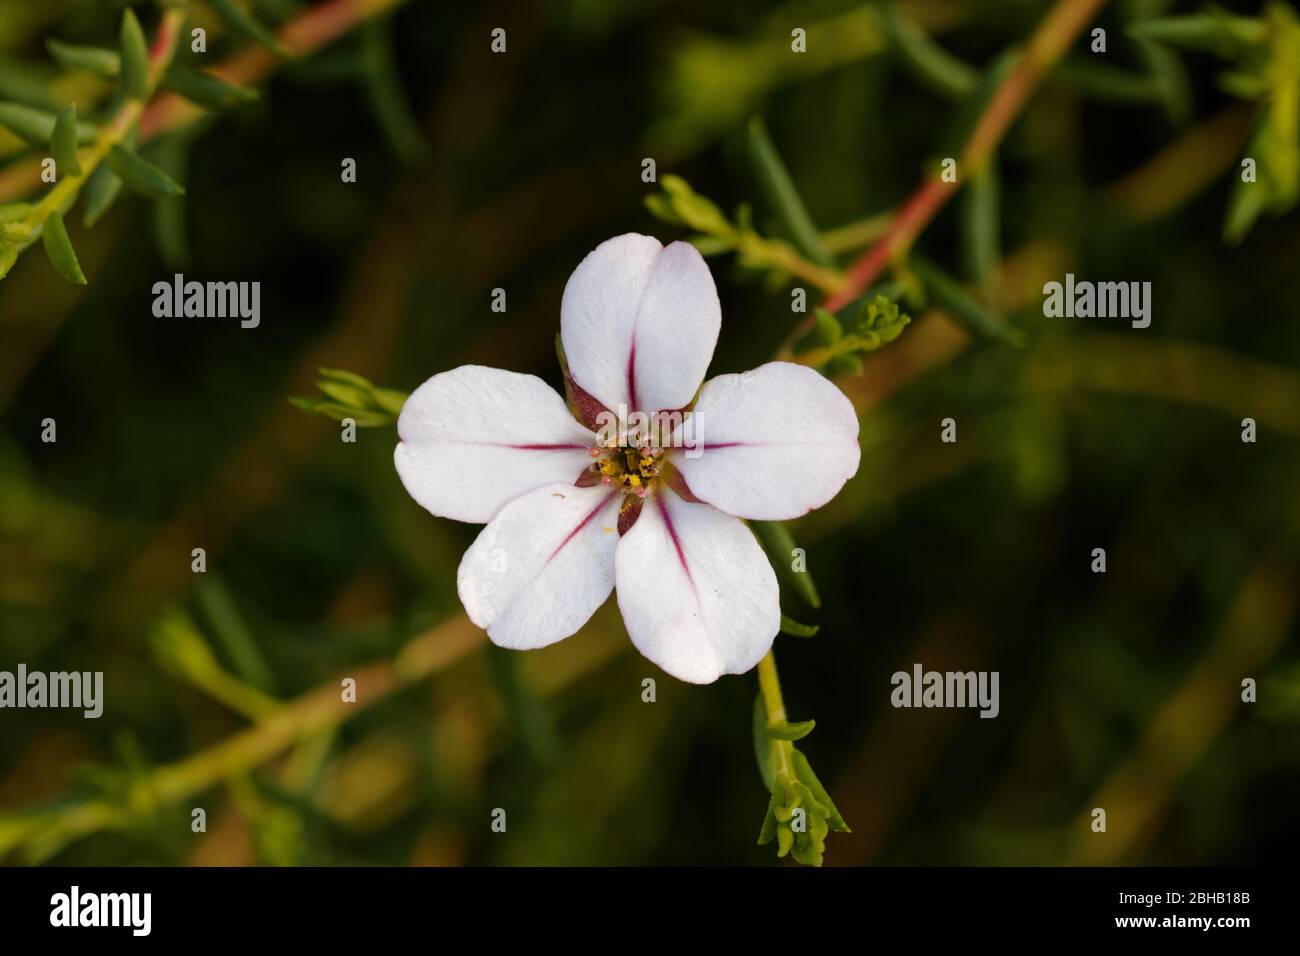 Adenandra uniflora. The flower has five rounded white petals, the glistening white resembling porcelain, with a suffusion of red along the veins. Stock Photo